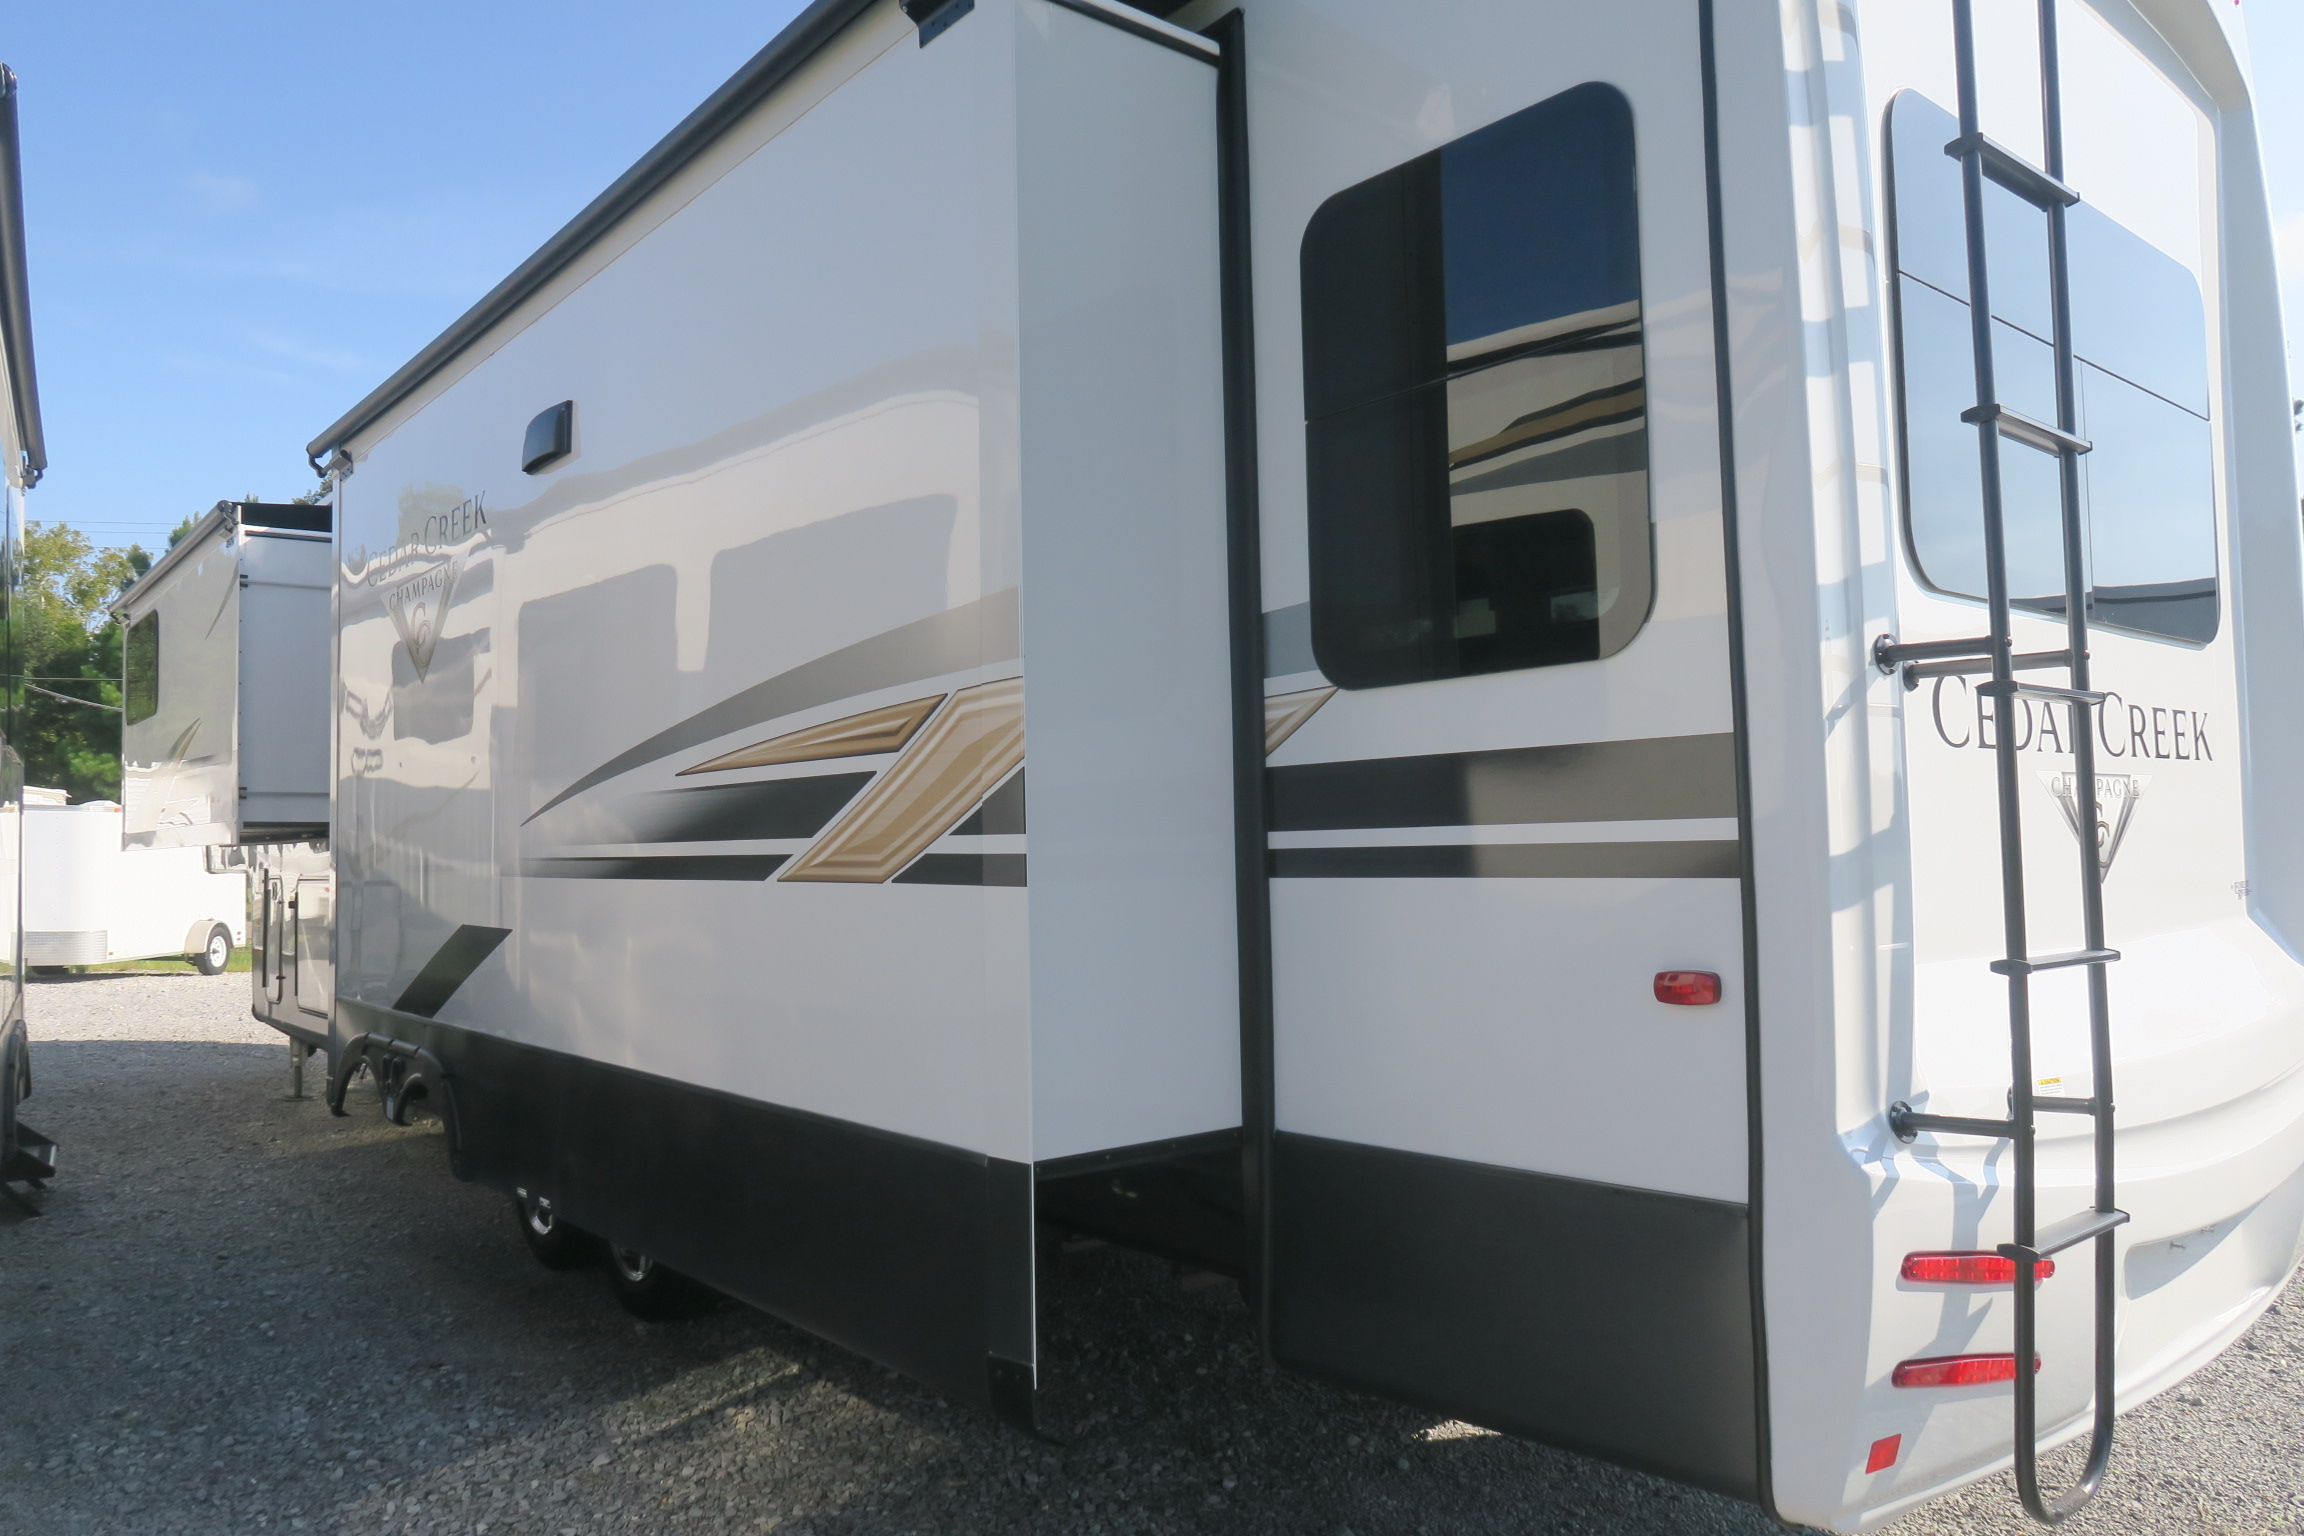 NEW 2021 CEDAR CREEK CHAMPAGNE EDITION 38EBS Overview Berryland Campers